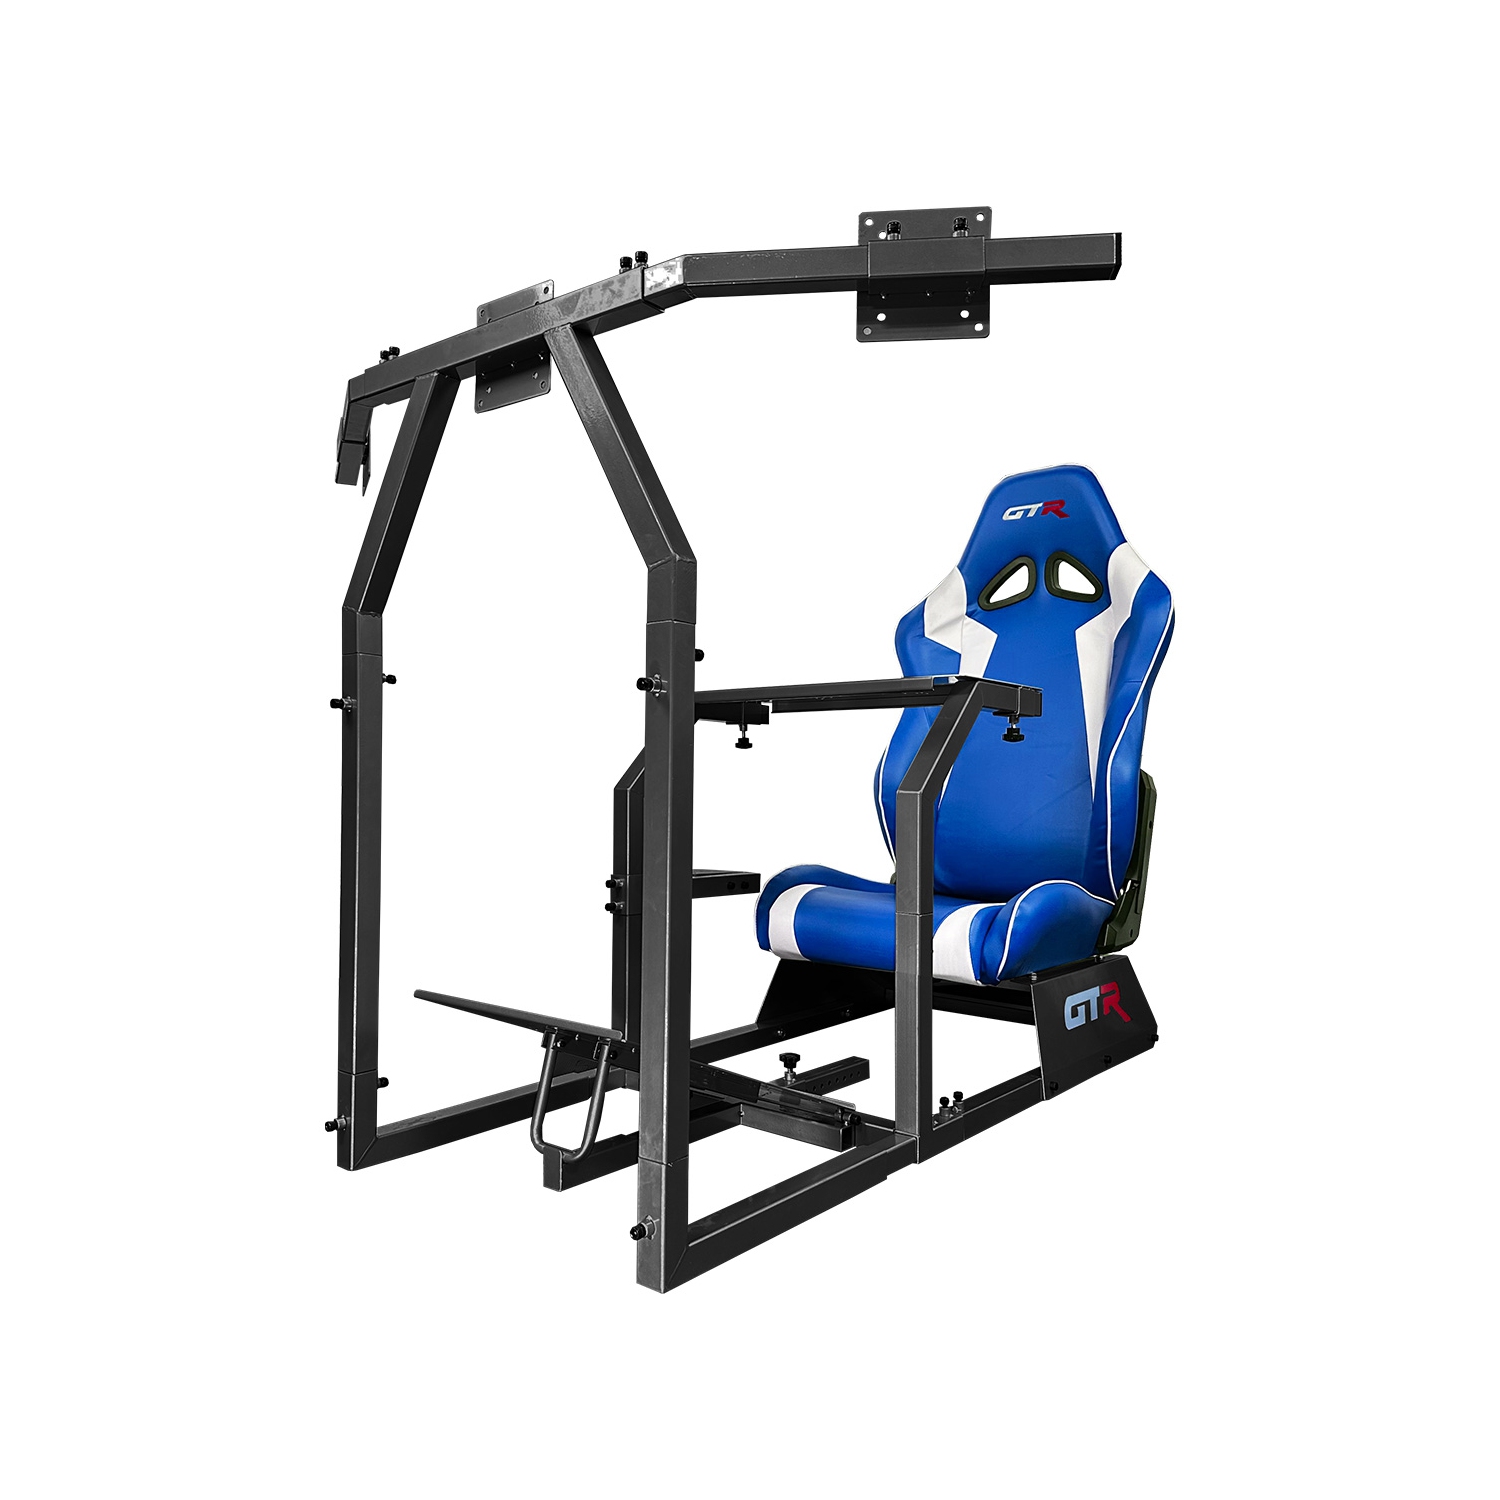 GTR Simulator GTA-F Model (Black) Triple or Single Monitor Stand with Blue/White Adjustable Leatherette Seat